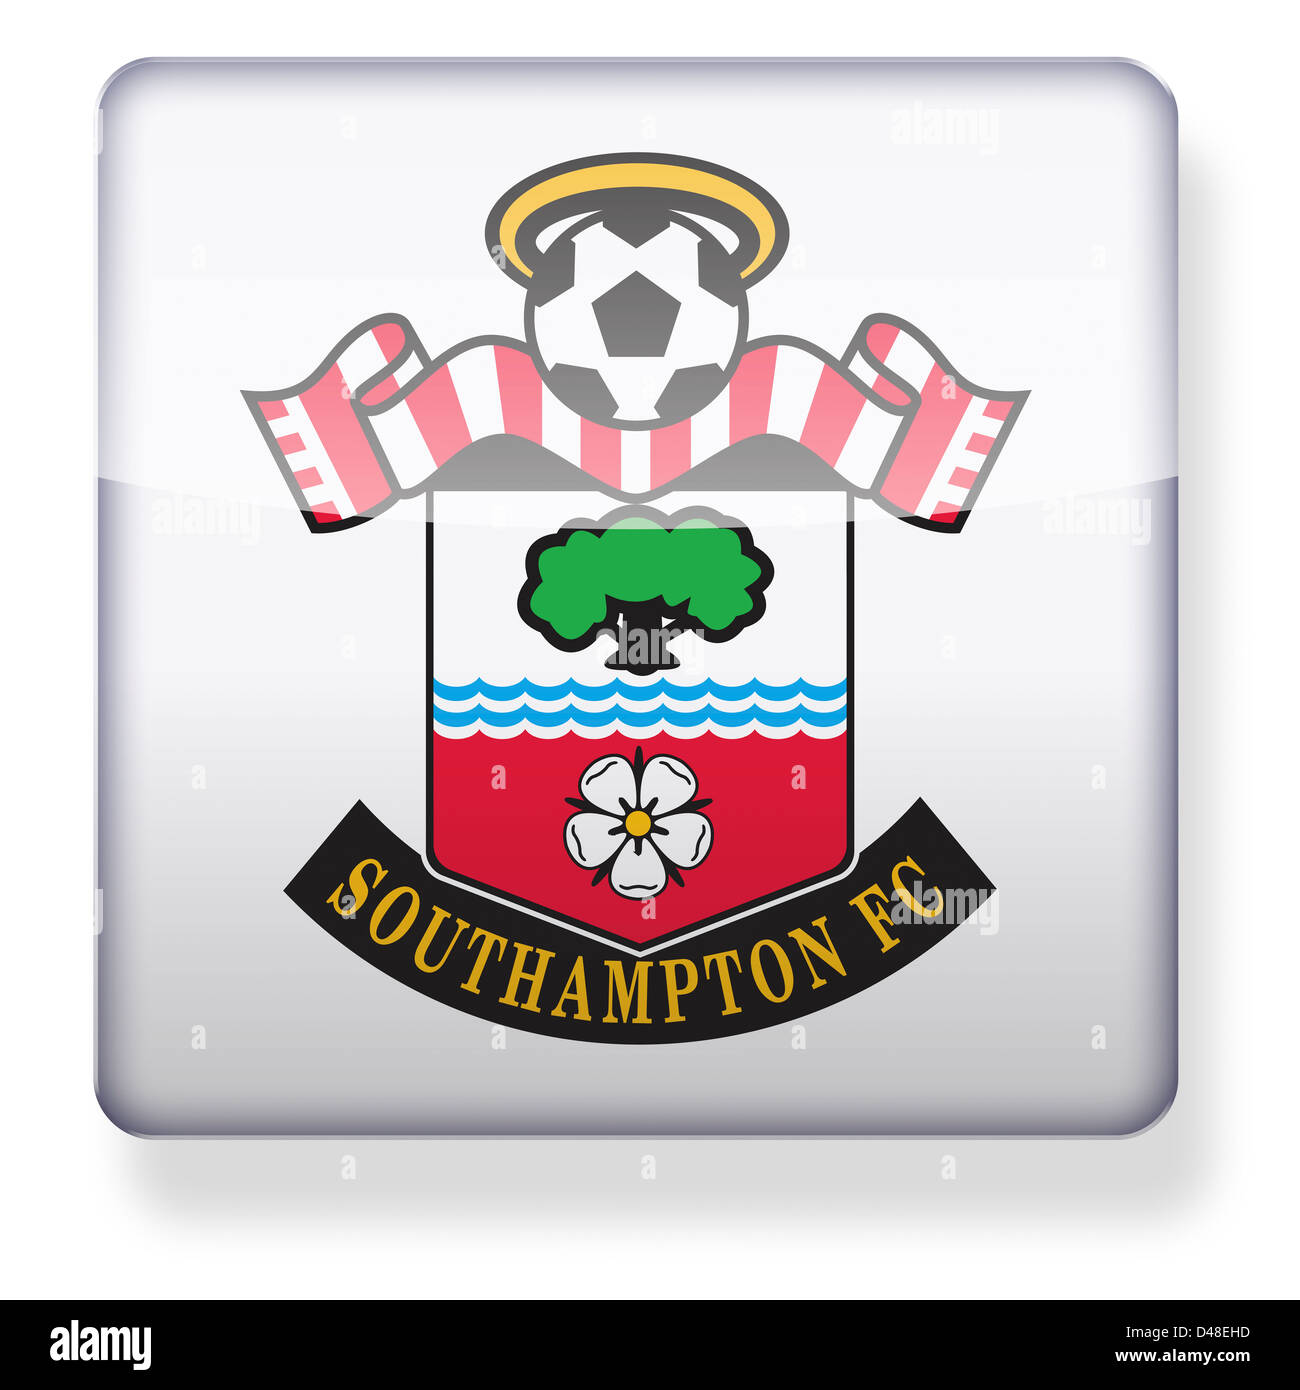 Southampton football club logo as an app icon. Clipping path included. Stock Photo